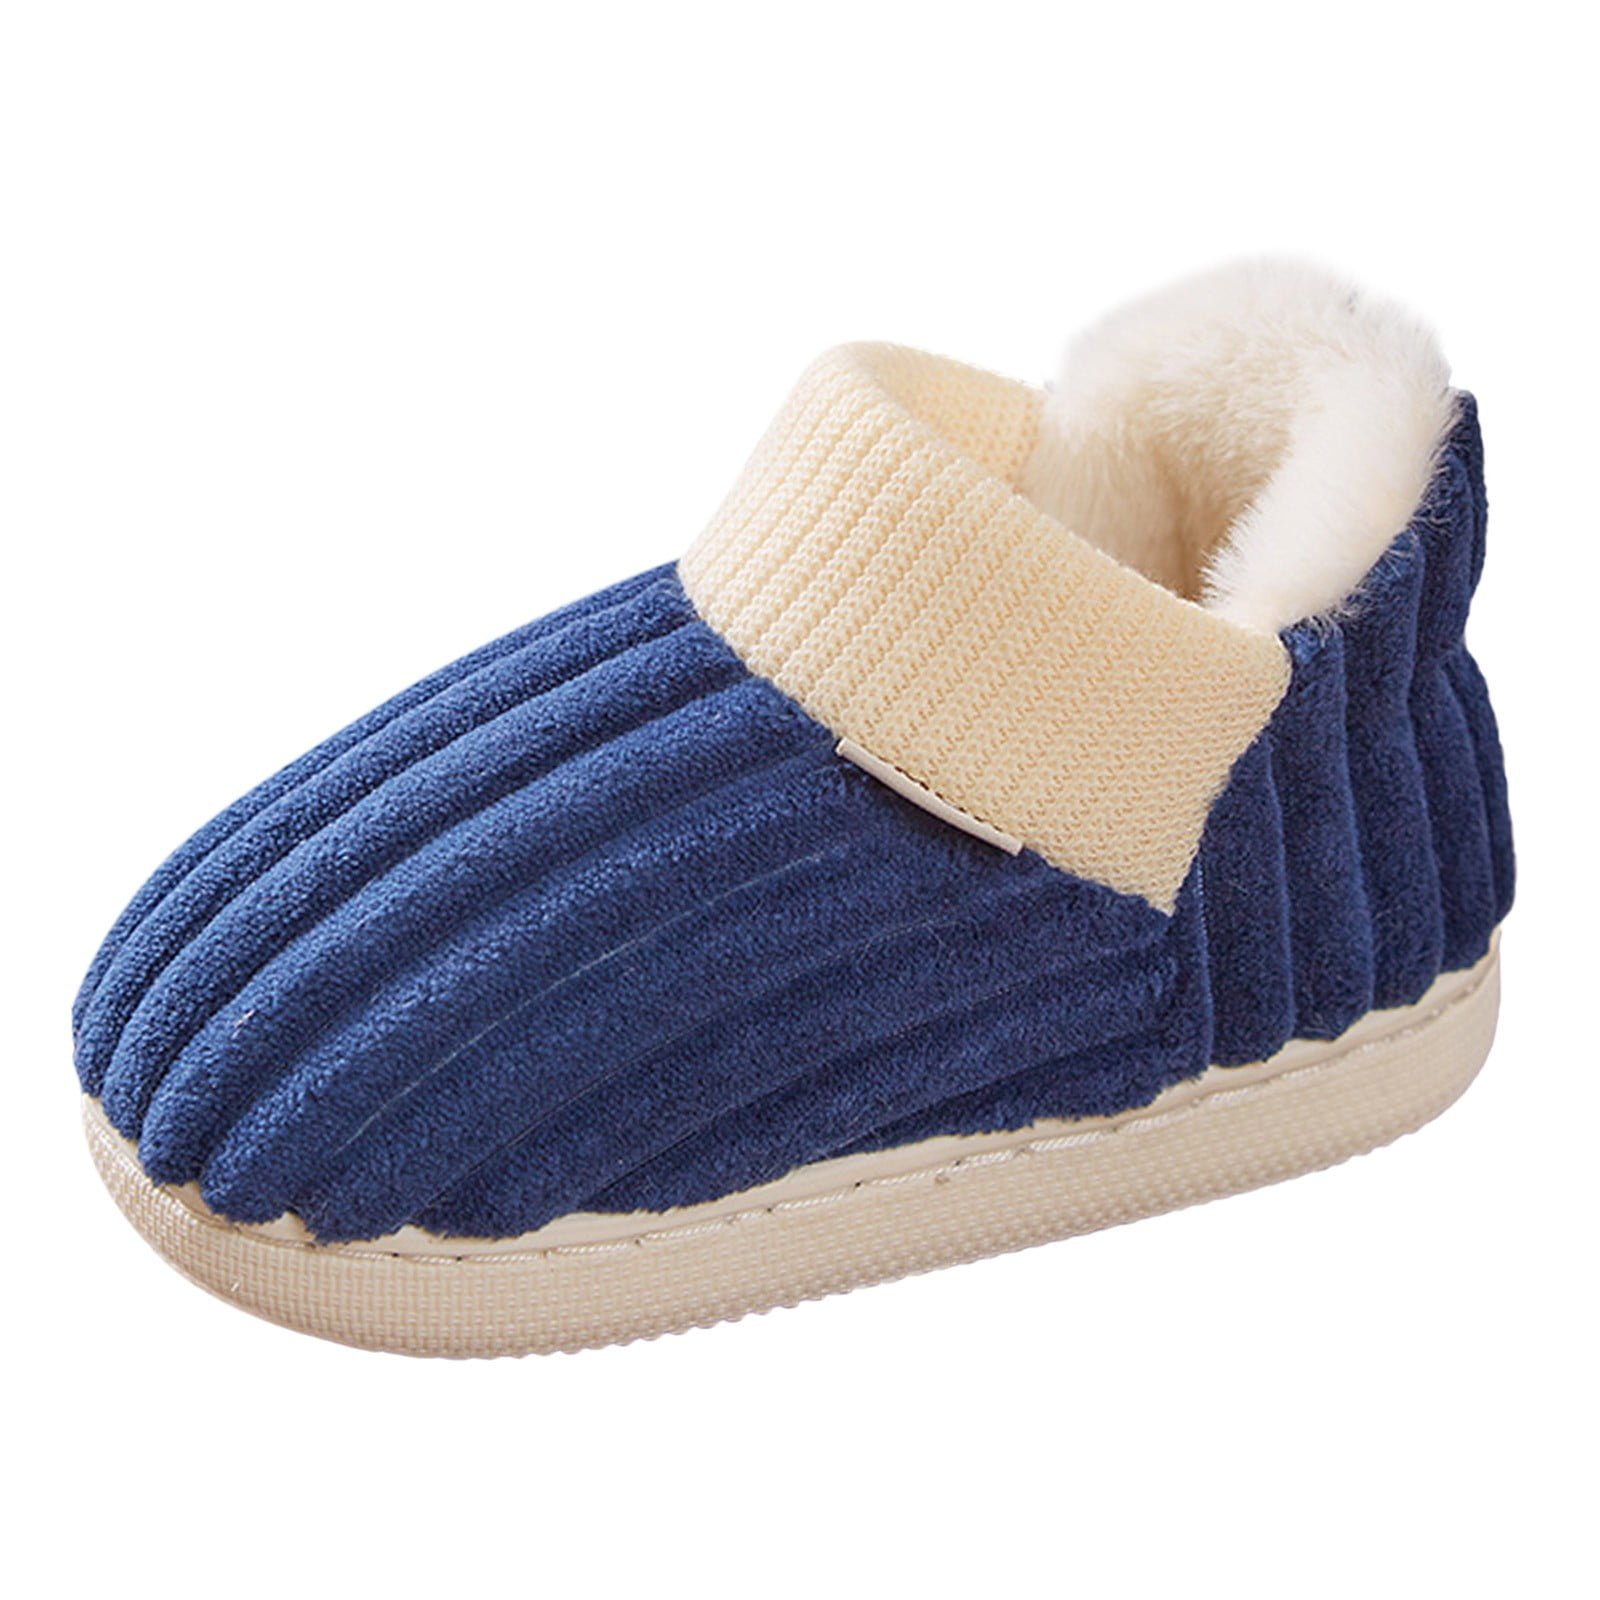 Elcssuy Kids Toddler Slippers Non-Slip Outsole Little Kids House Slippers Indoor Shoes for Boys Girls 